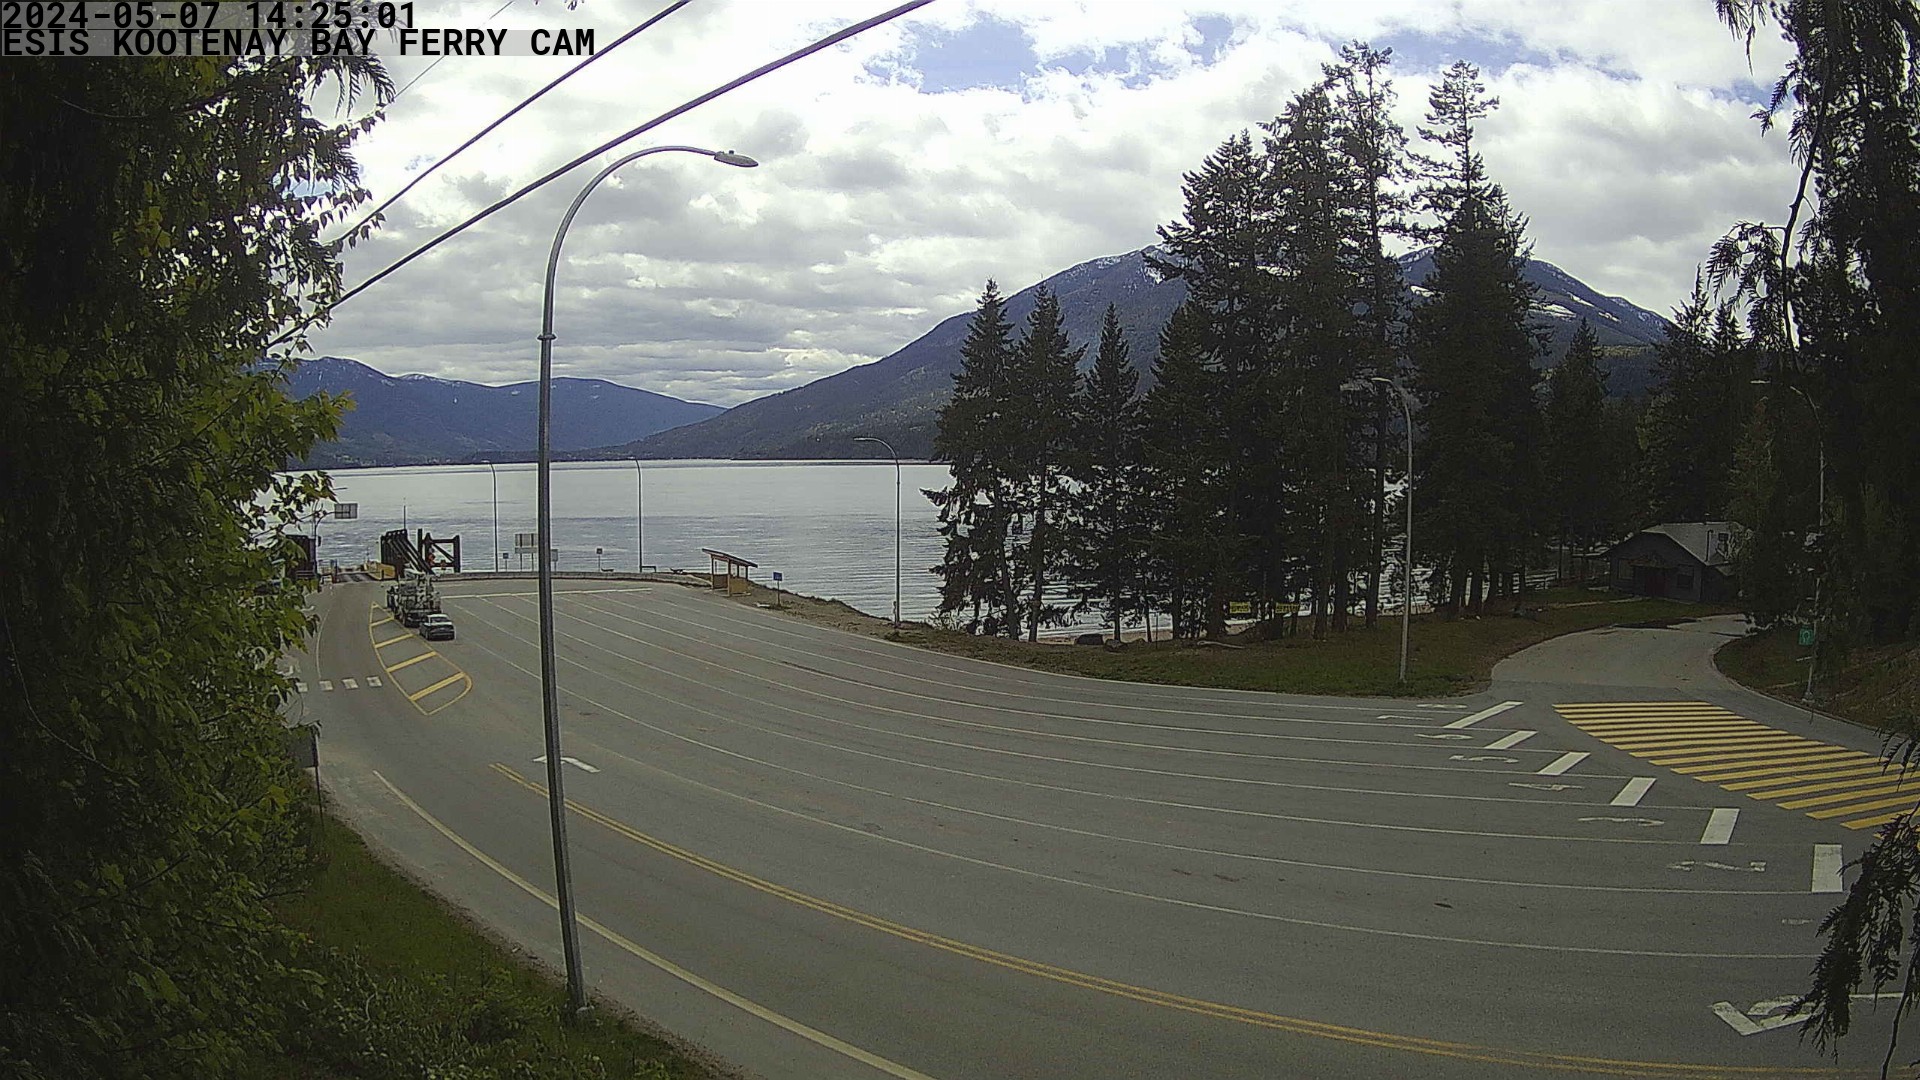 Kootenay Bay Ferry Landing Webcam - Provided by the 
East Shore Internet Society, with funding by the RDCK EDCK